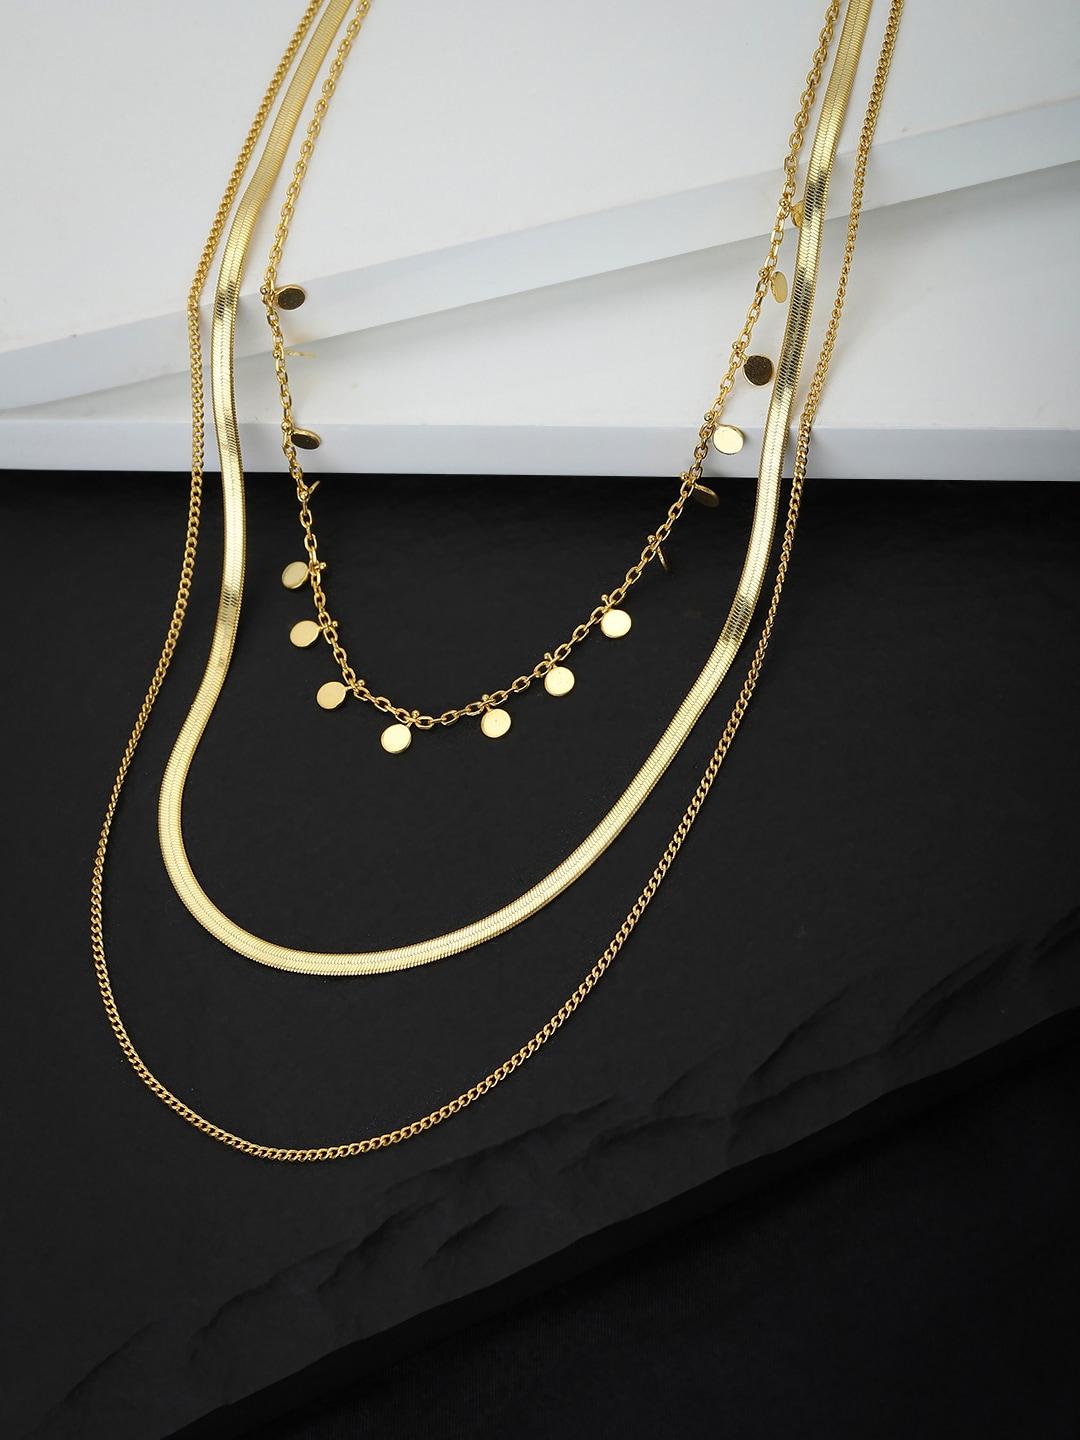 carlton-london-gold-toned-brass-gold-plated-layered-necklace